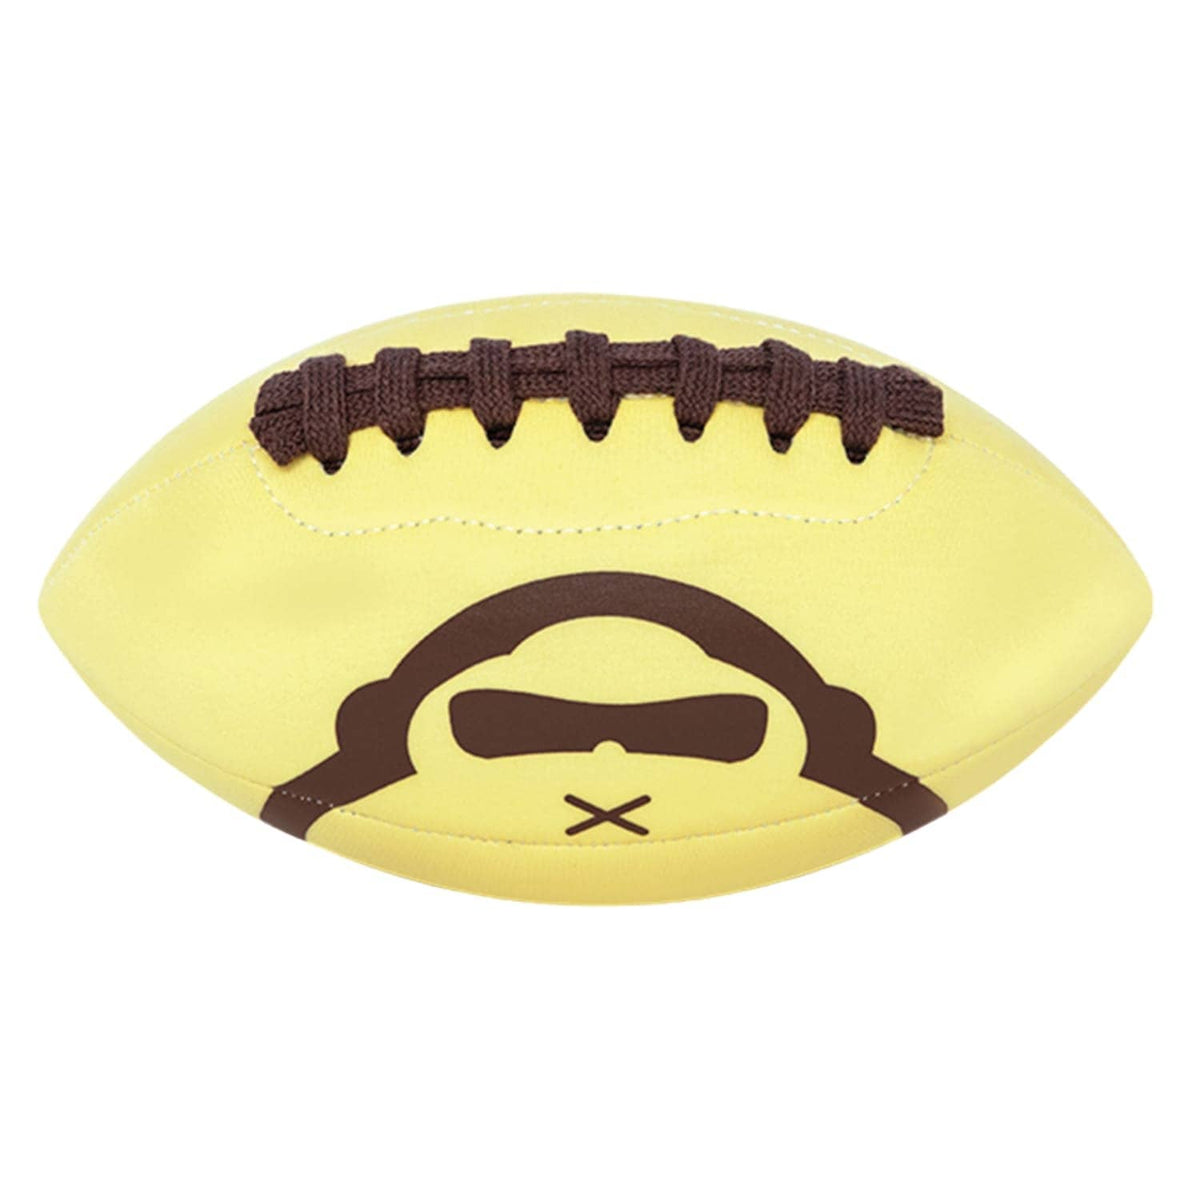 Sun Bum Waterproof Beach American Football Yellow O/S (one size) - Gifts for Surfers by Sun Bum